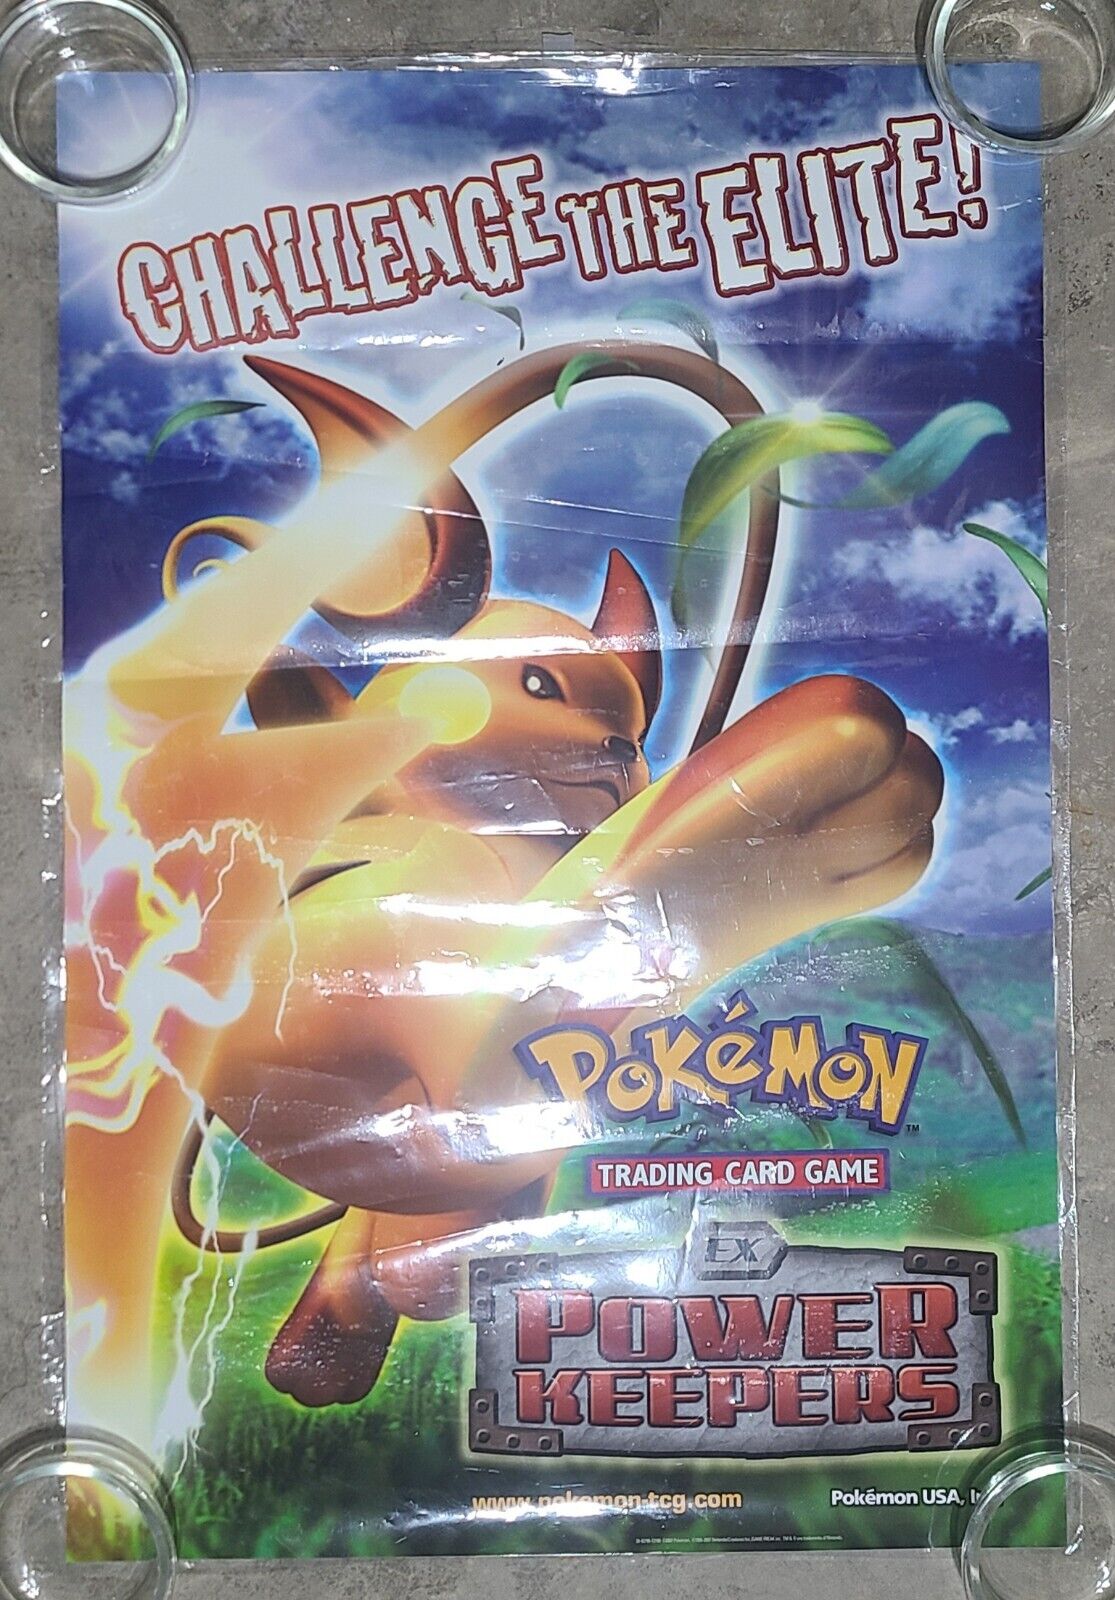 Pokemon EX Powers keepers pre release poster